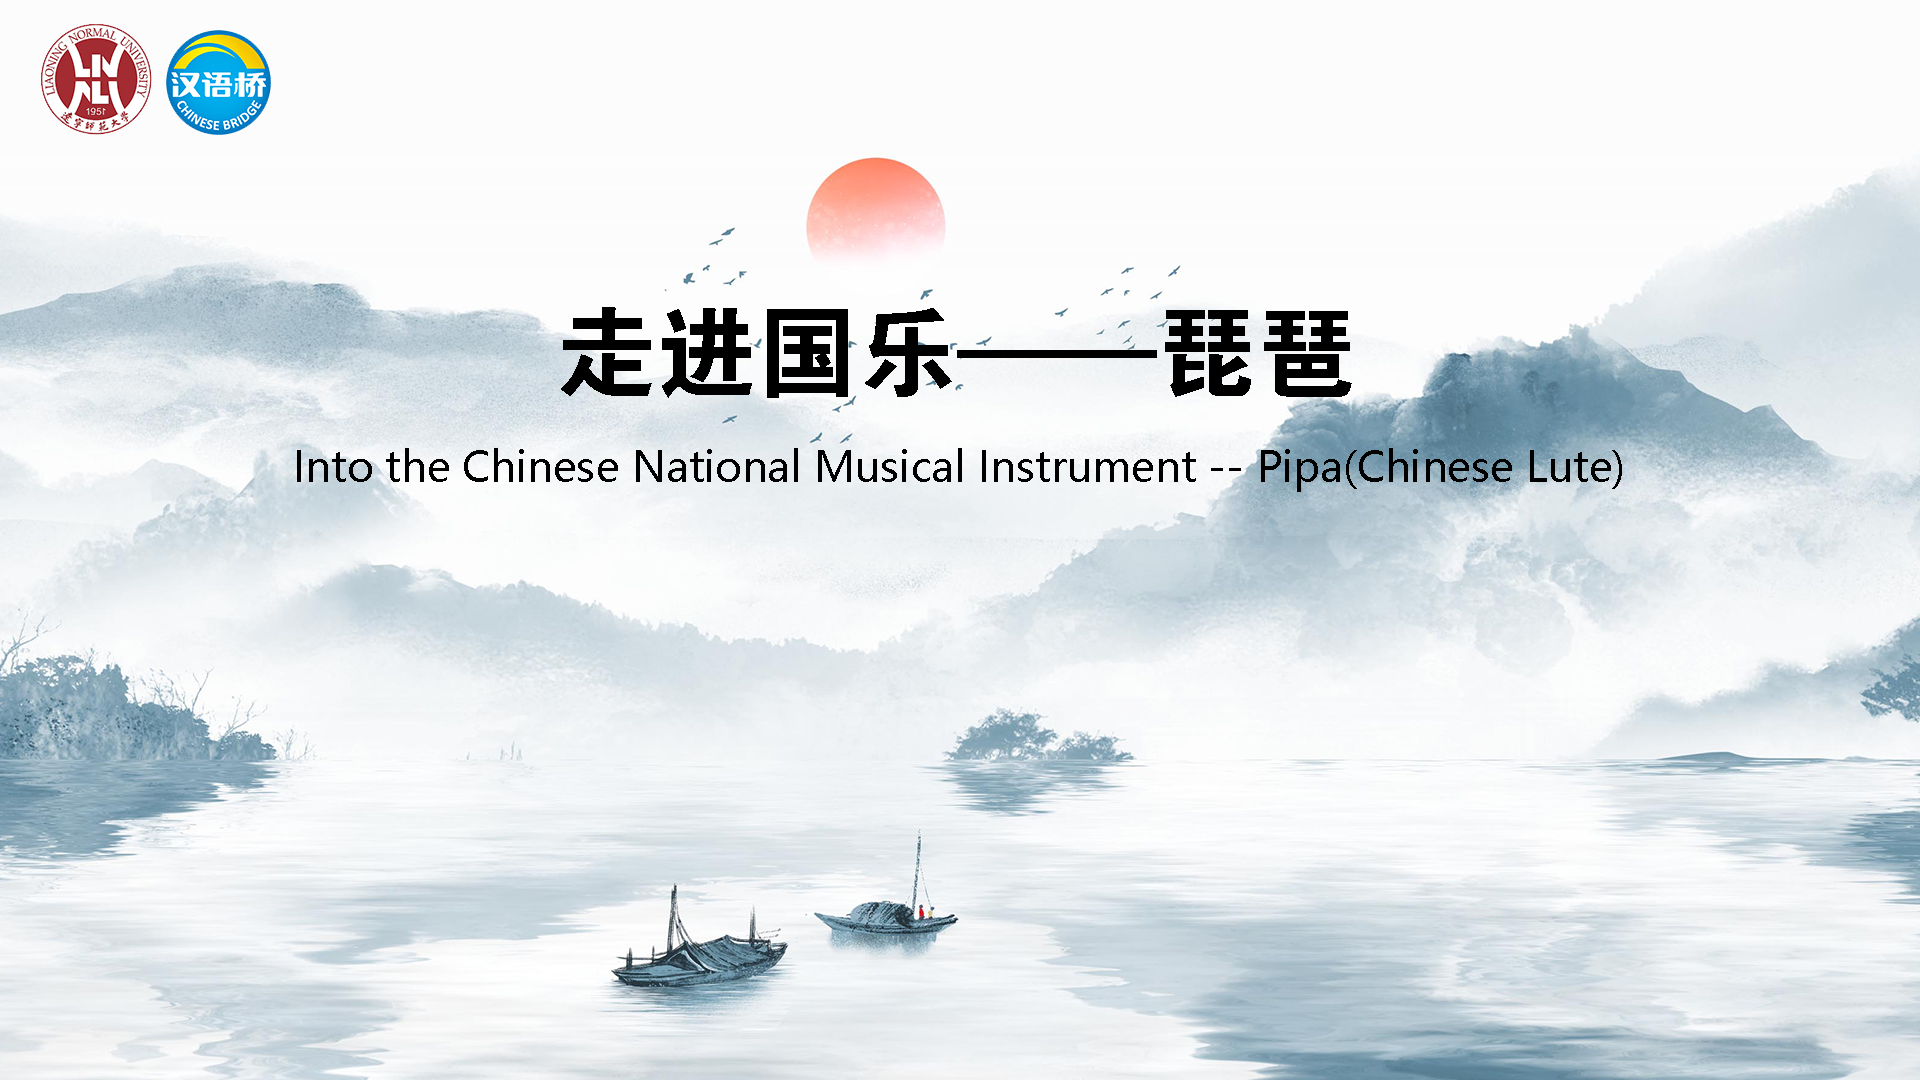 Into the Chinese National Musical Instrument -- Pipa